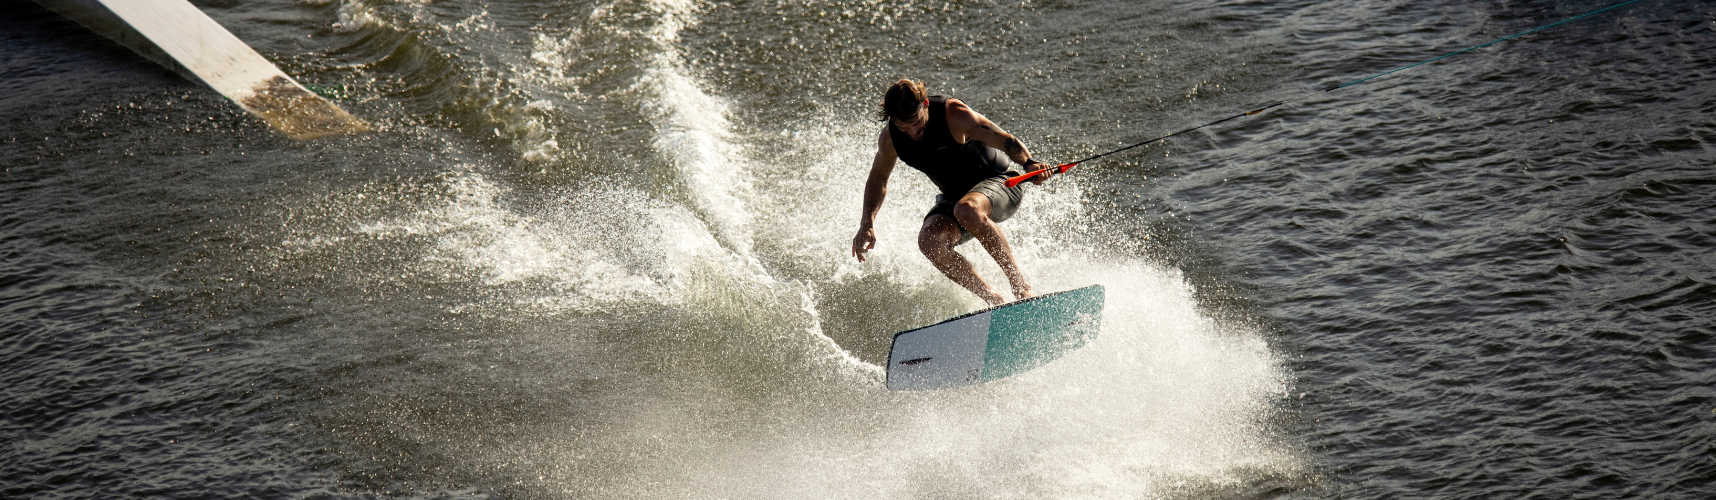 Man jumping while on a wakeskate